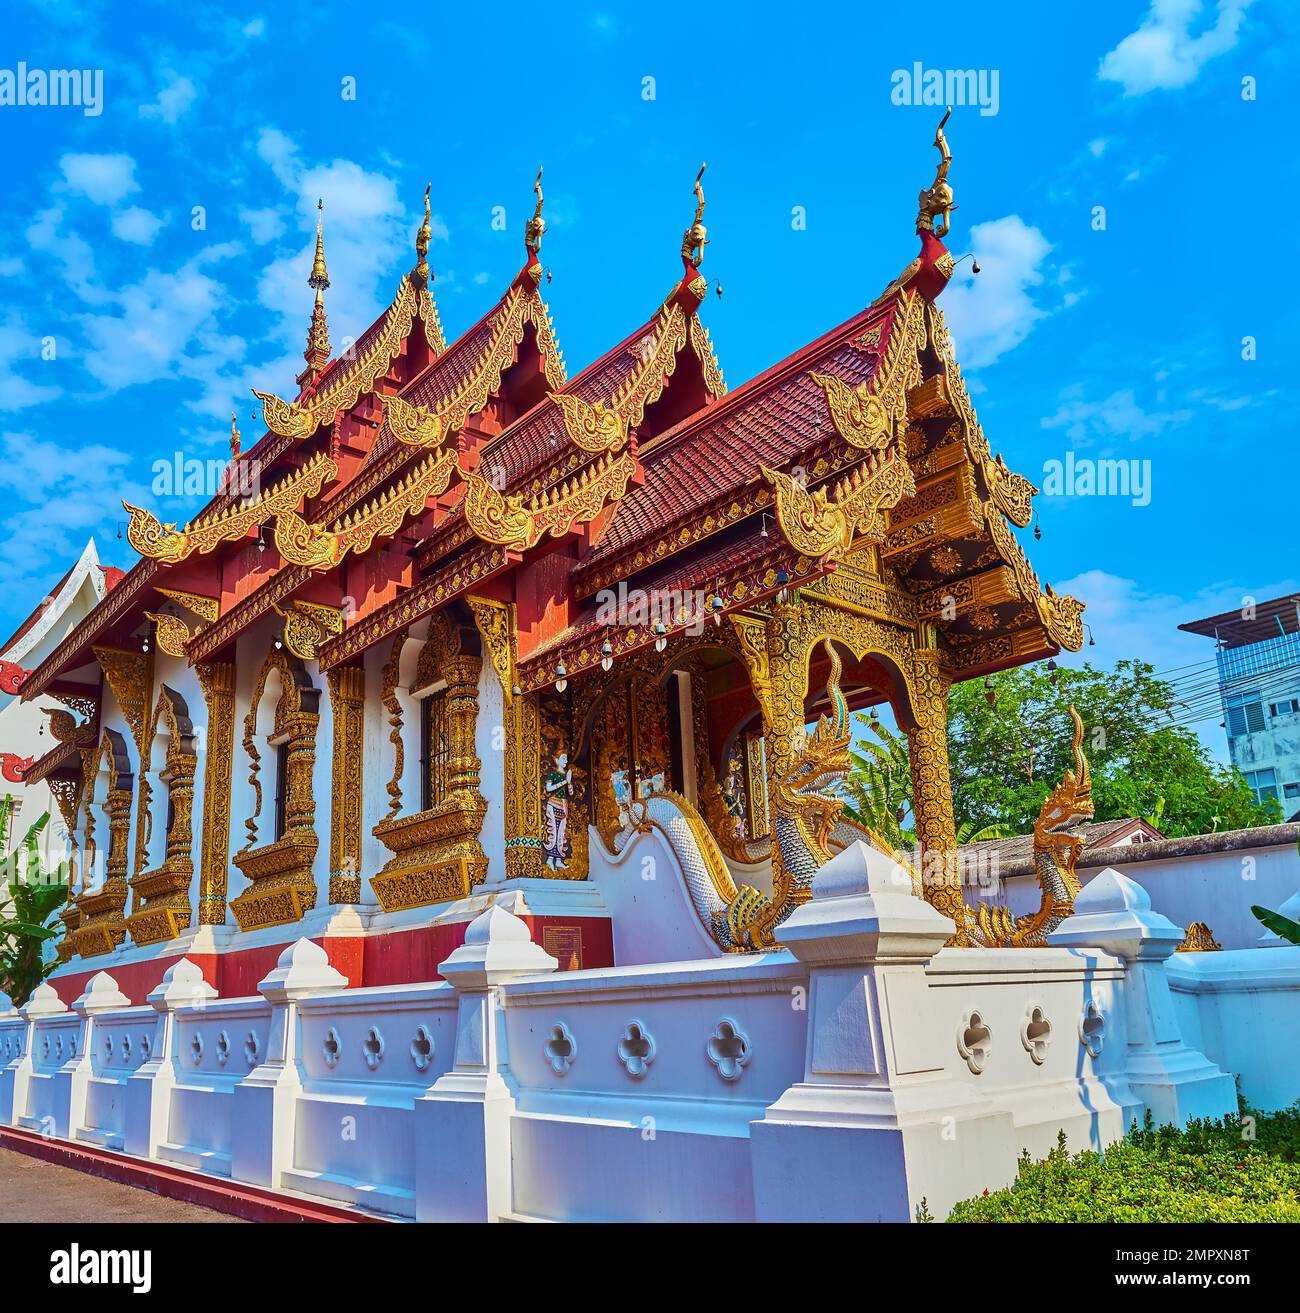 Exterior of Ubosot of Wat Saen Muang Ma temple with Naga serpent sculptures, moulding, gilt patterns, pyathat roof, Chiang Mai, Thailand Stock Photo